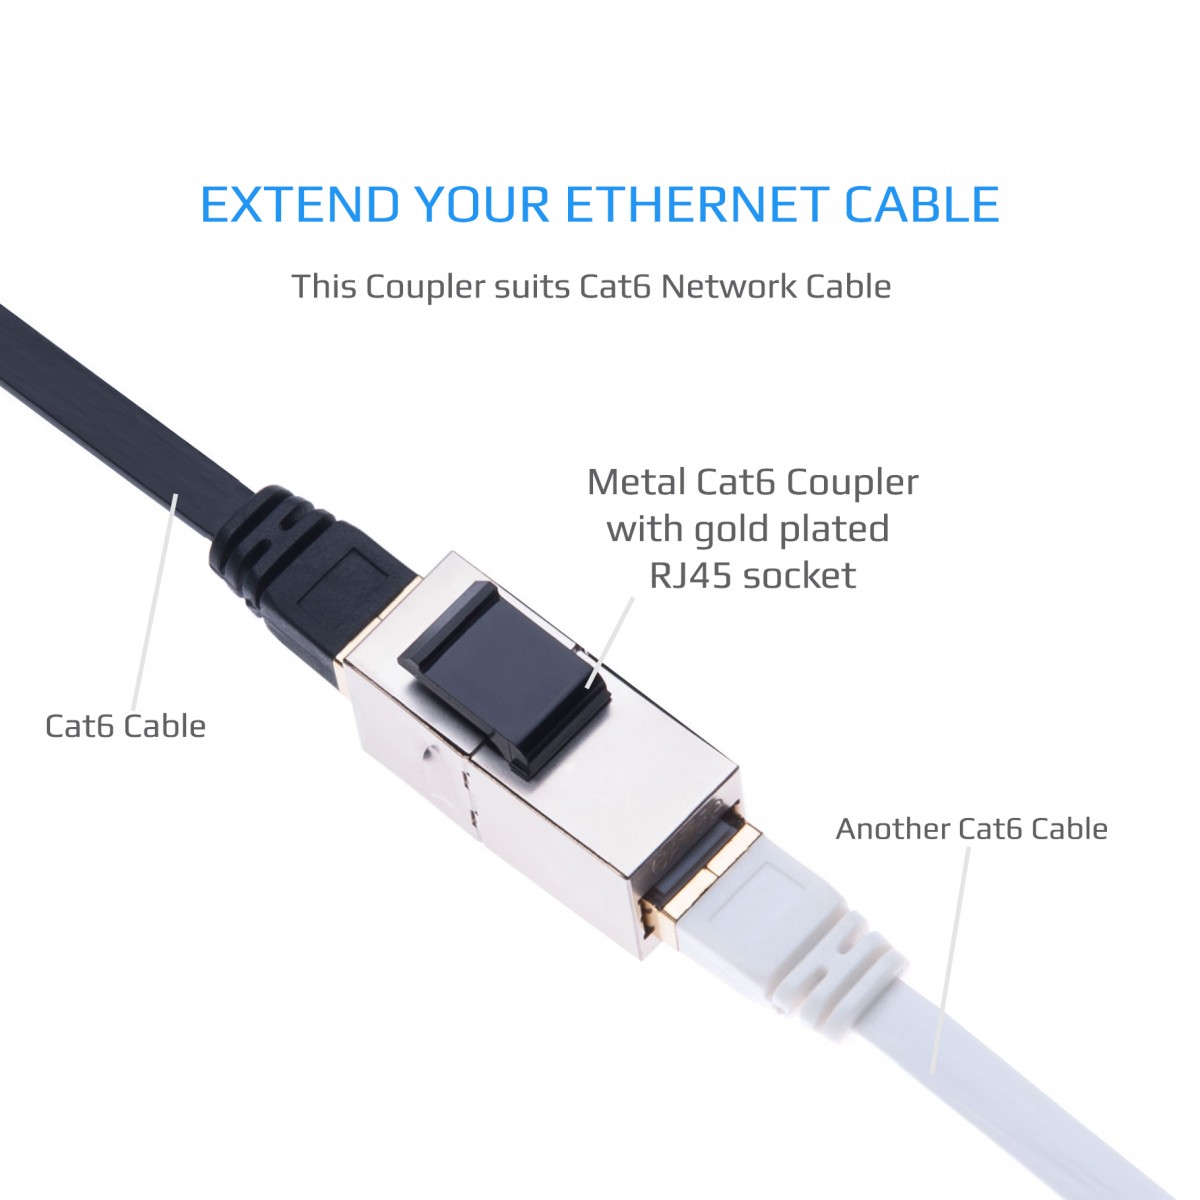 Wgxyihai Multi Function Equipment Network Patch Cable Connector Extender Jack in-Line RJ45 Ethernet Female to Female Cable Jack Straight Module Adapter Fiber Optic Tool Kit